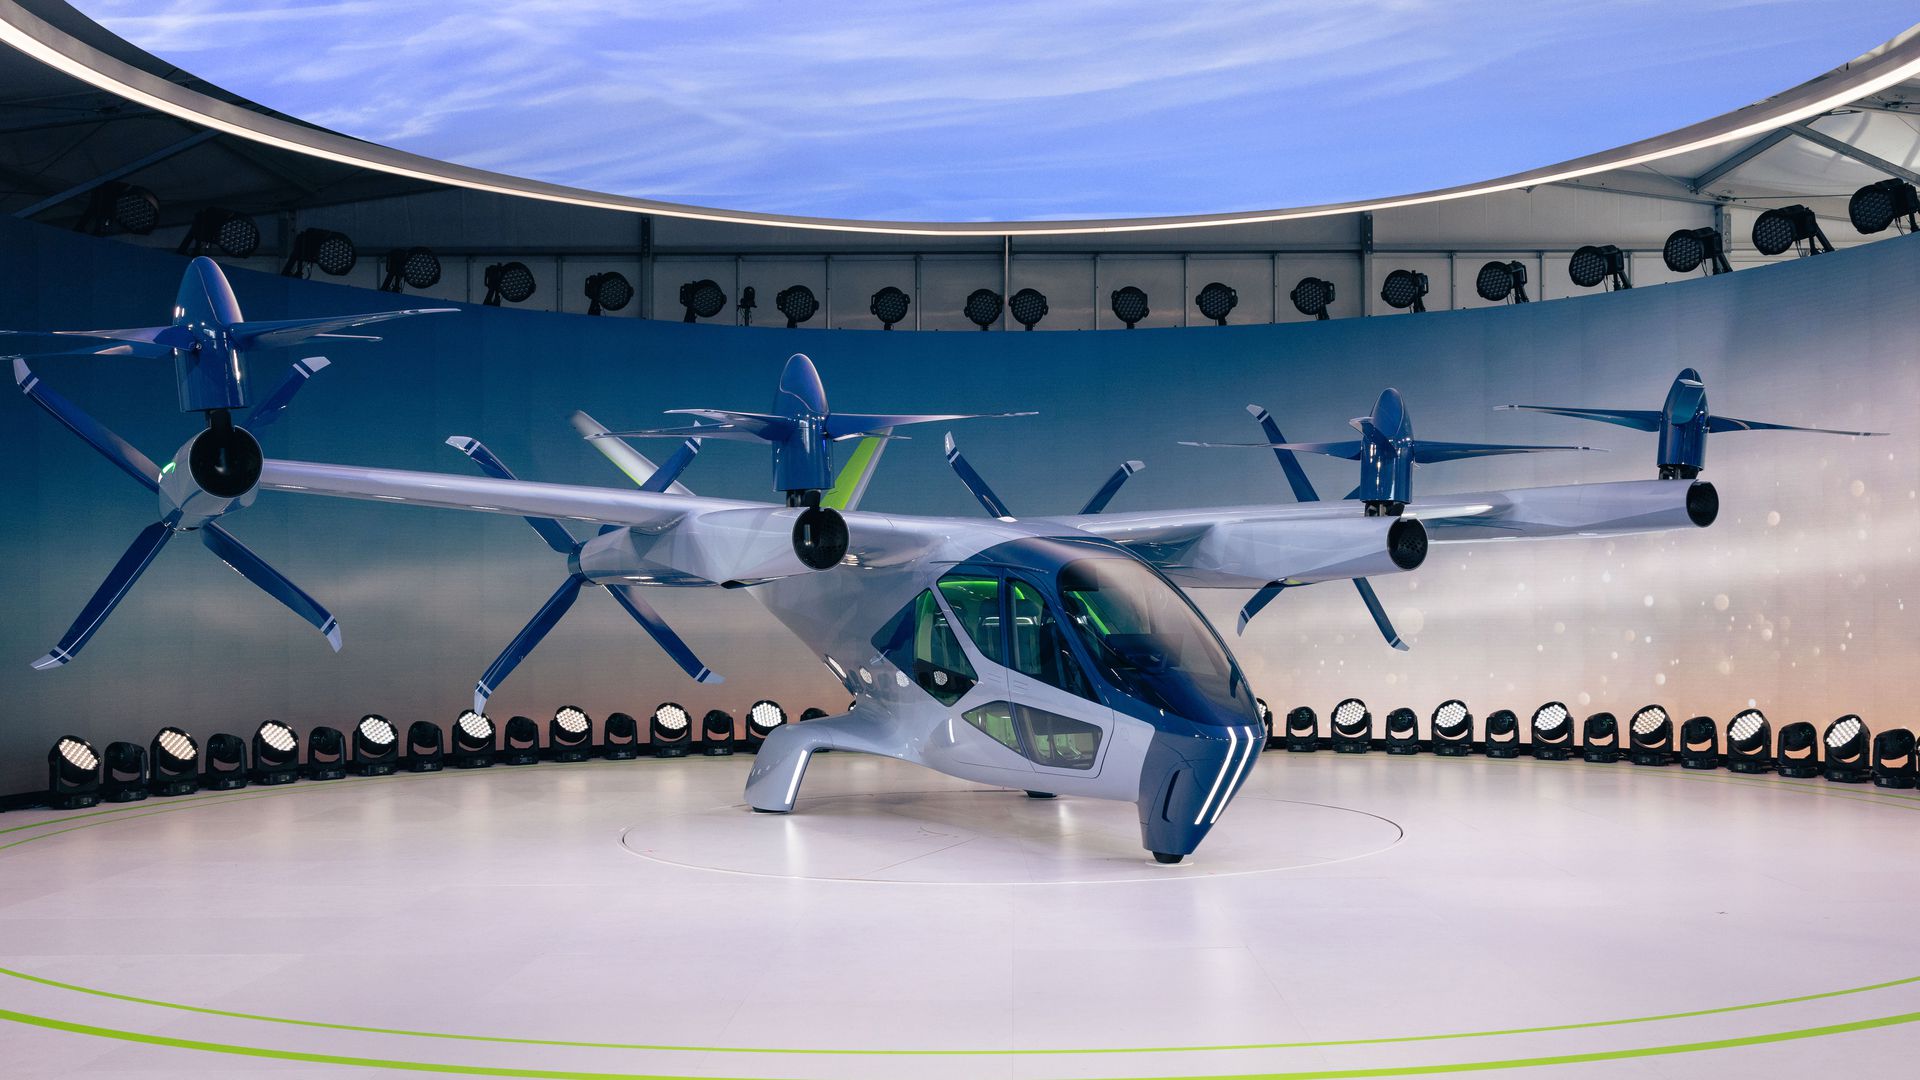 hyundai says its four-passenger evtol will be ready for 2028